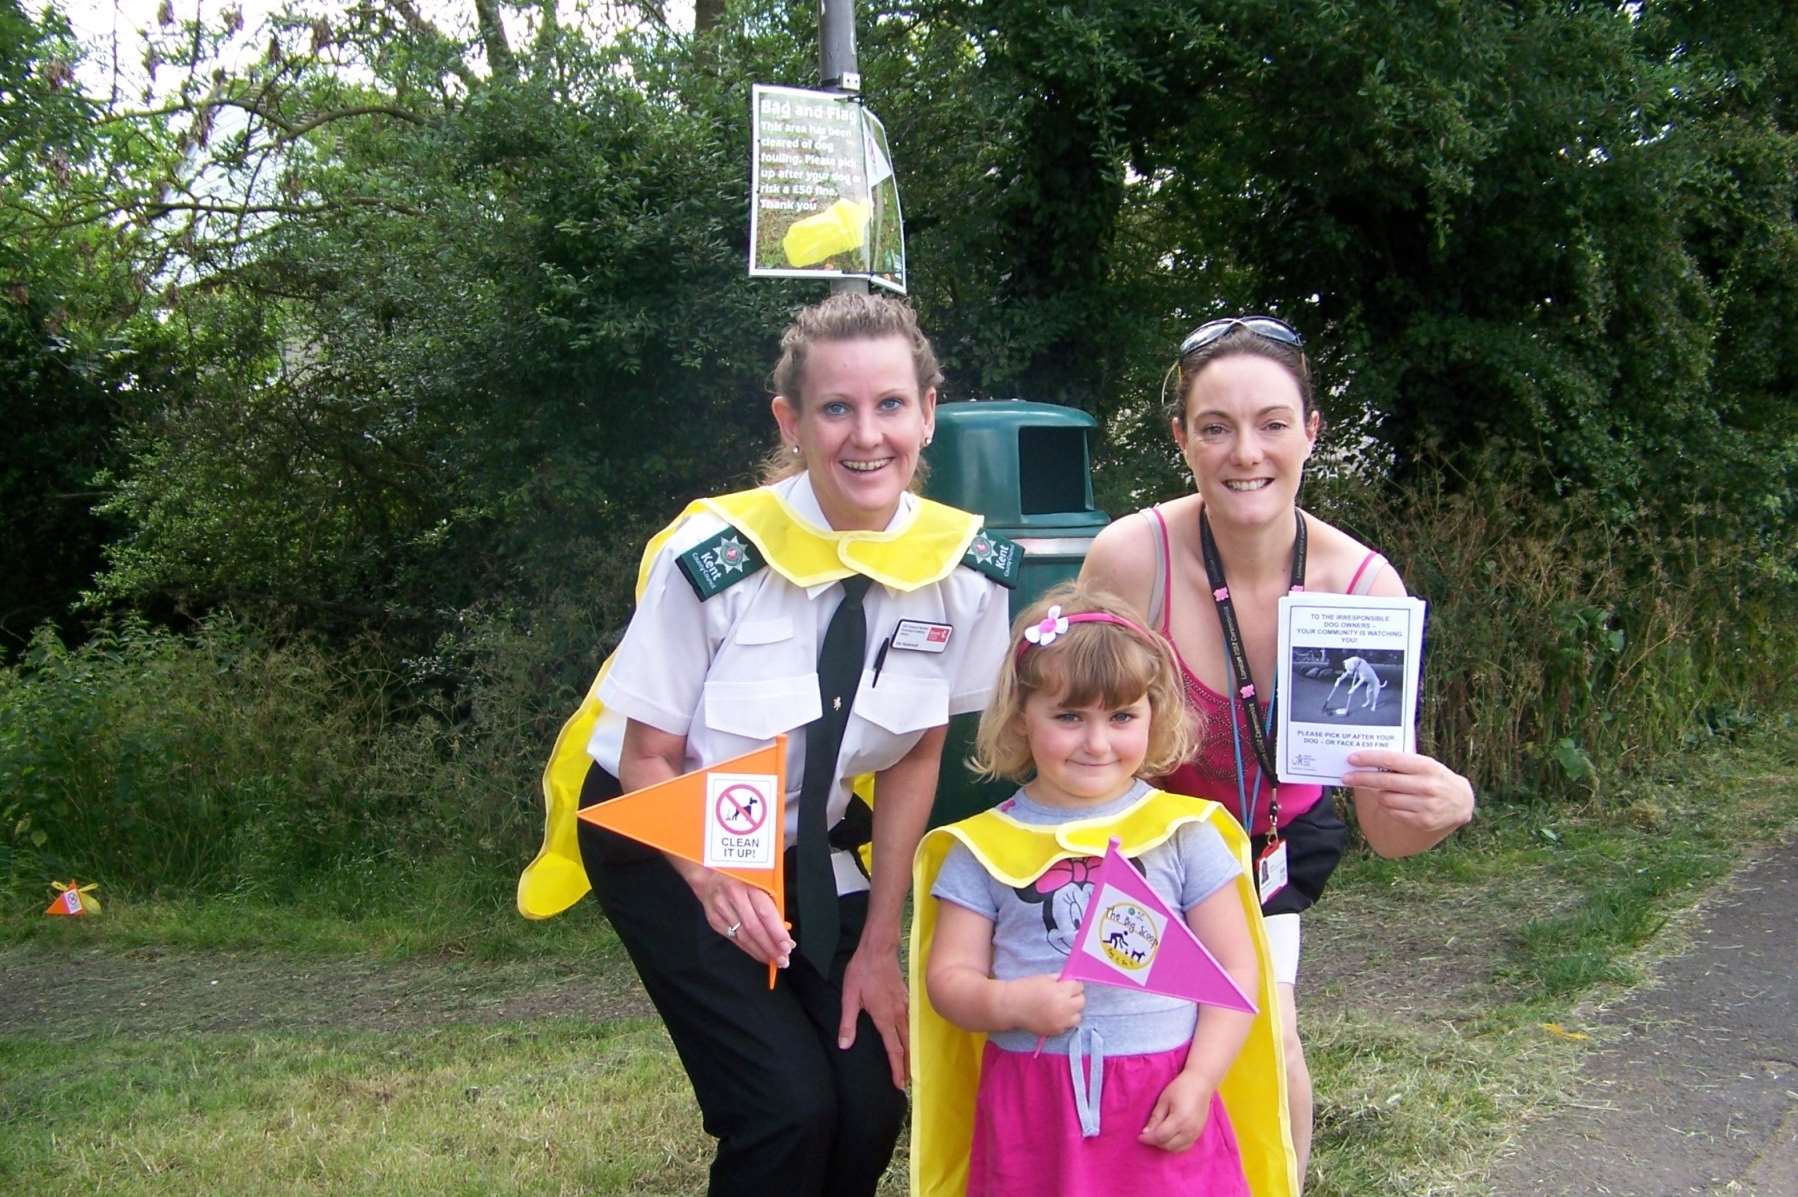 Holly, age 4 from Hildenborough puts on a scooper hero cape to support The Big Scoop 2014 with Viv Hickmott, KCC Community Warden (left) and Tamsin Ritchie, Tonbridge & Malling Borough Council’s Environmental Projects Coordinator.